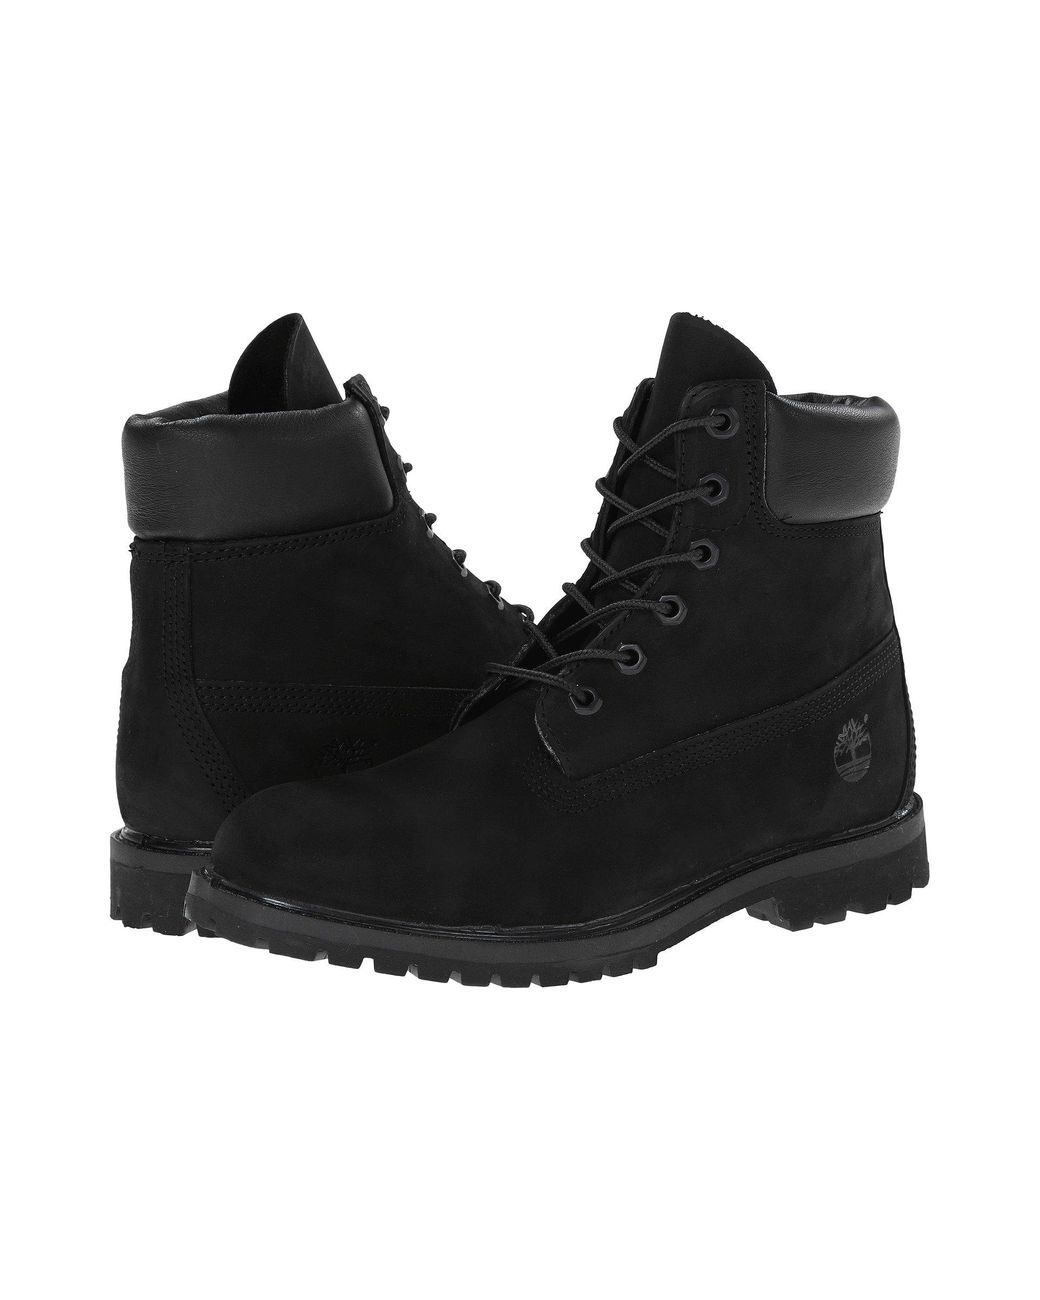 Timberland 6-Inch Premium Leather Boots in Black Nubuck (Black) - Save 23%  - Lyst